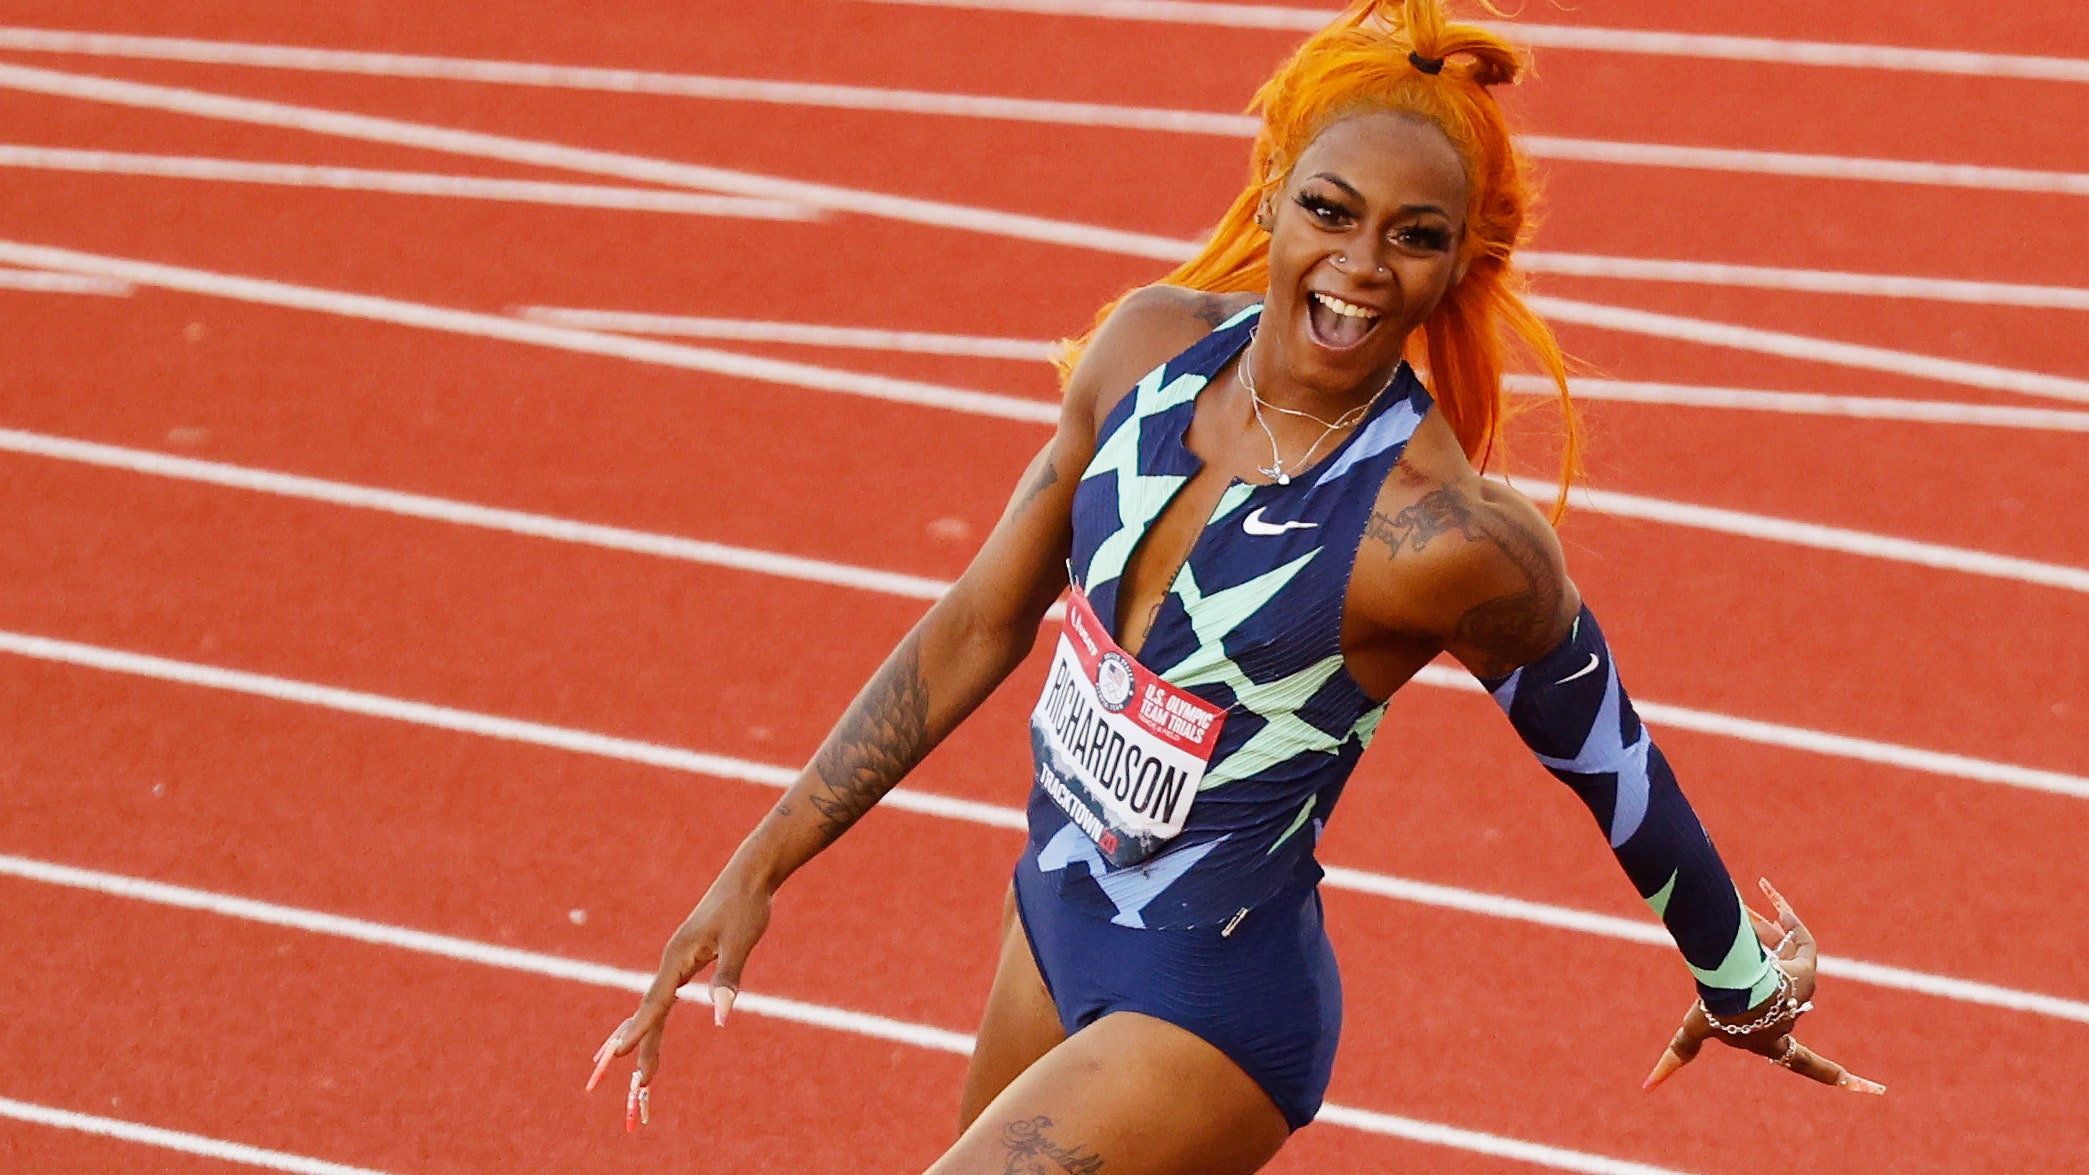 3. Meet the Rising Star of Track and Field: Blue-Haired Sprinter Dominates Competition - wide 2